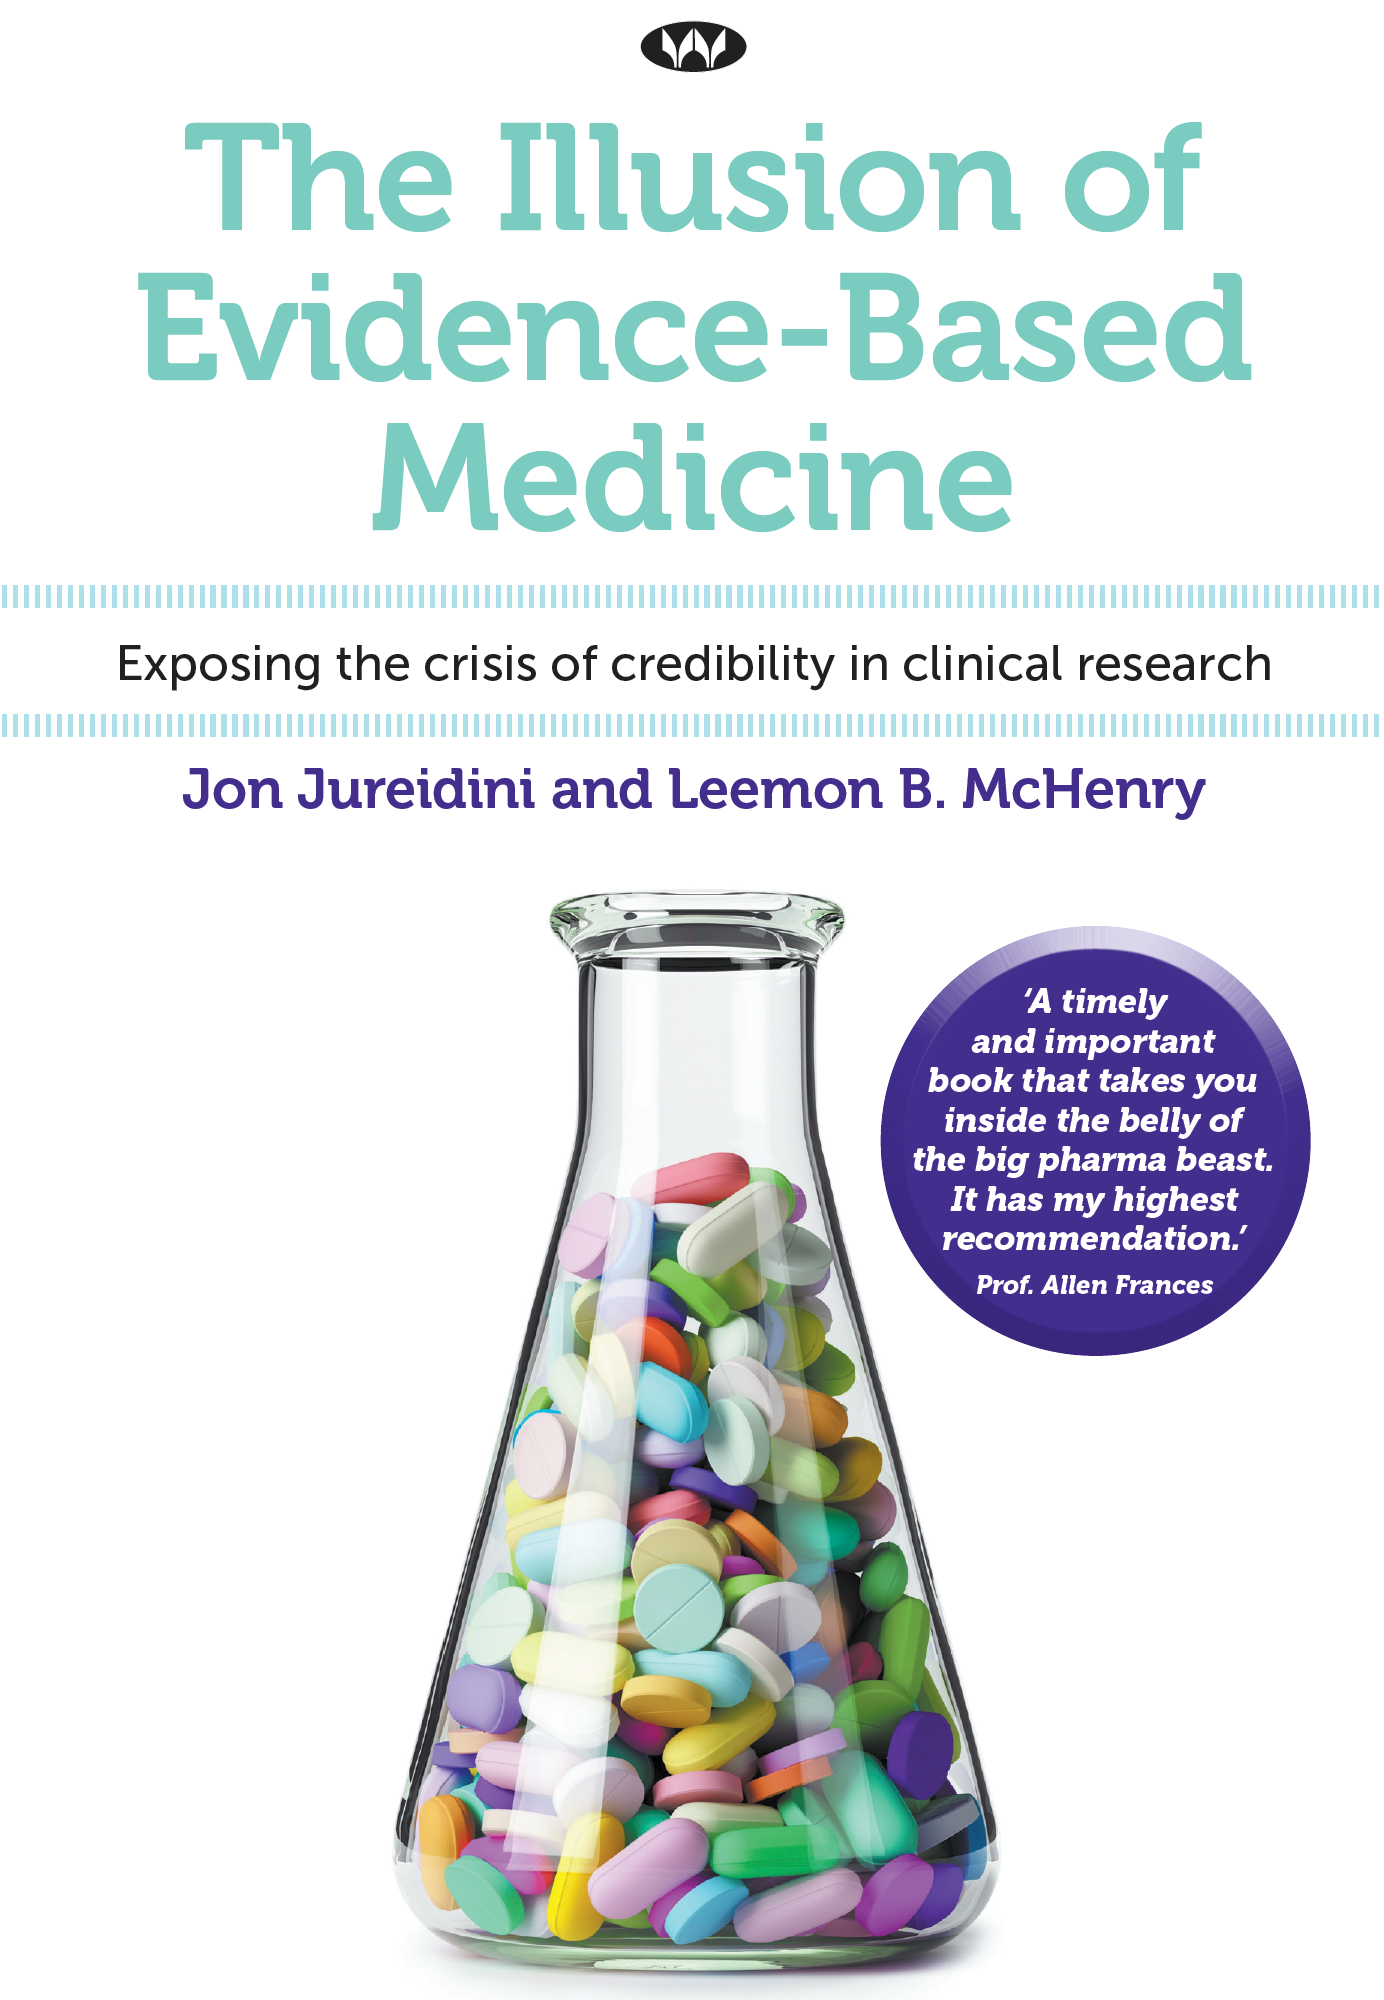 The Illusion of Evidence Based Medicine book